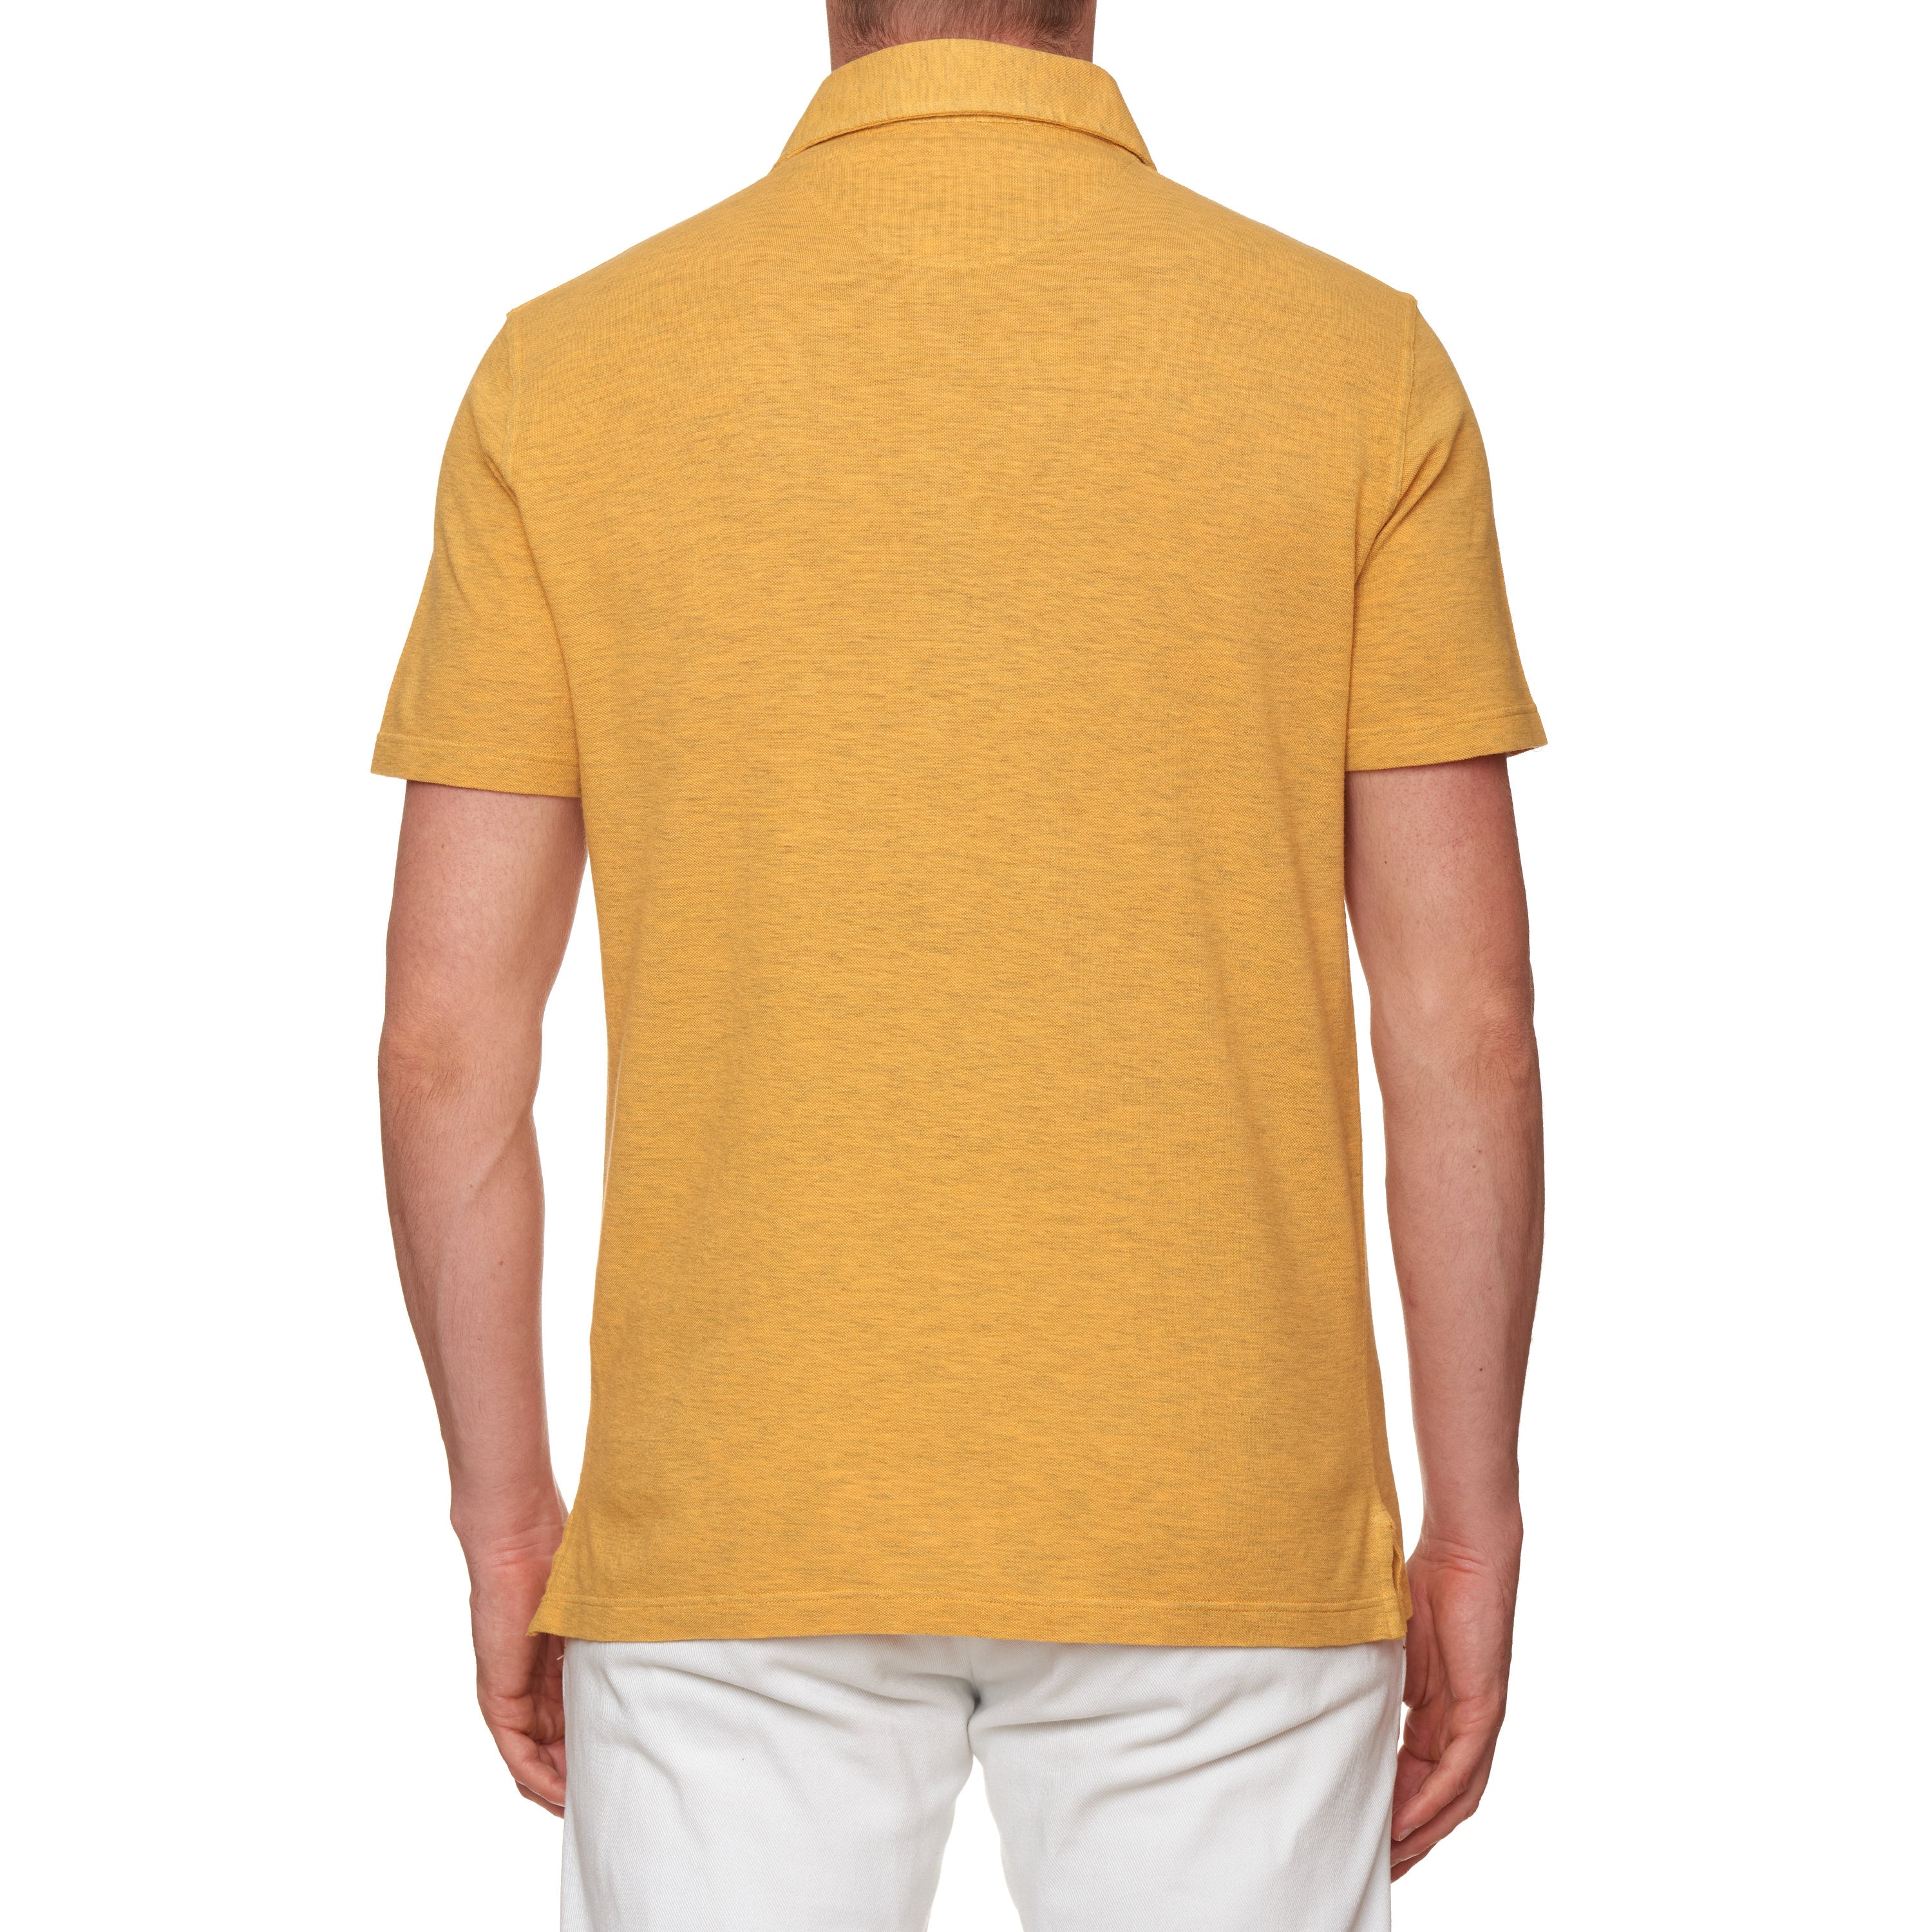 FEDELI "Tommy" Heather Yellow Cotton Short Sleeve Pique Polo Shirt 50 NEW US M FEDELI